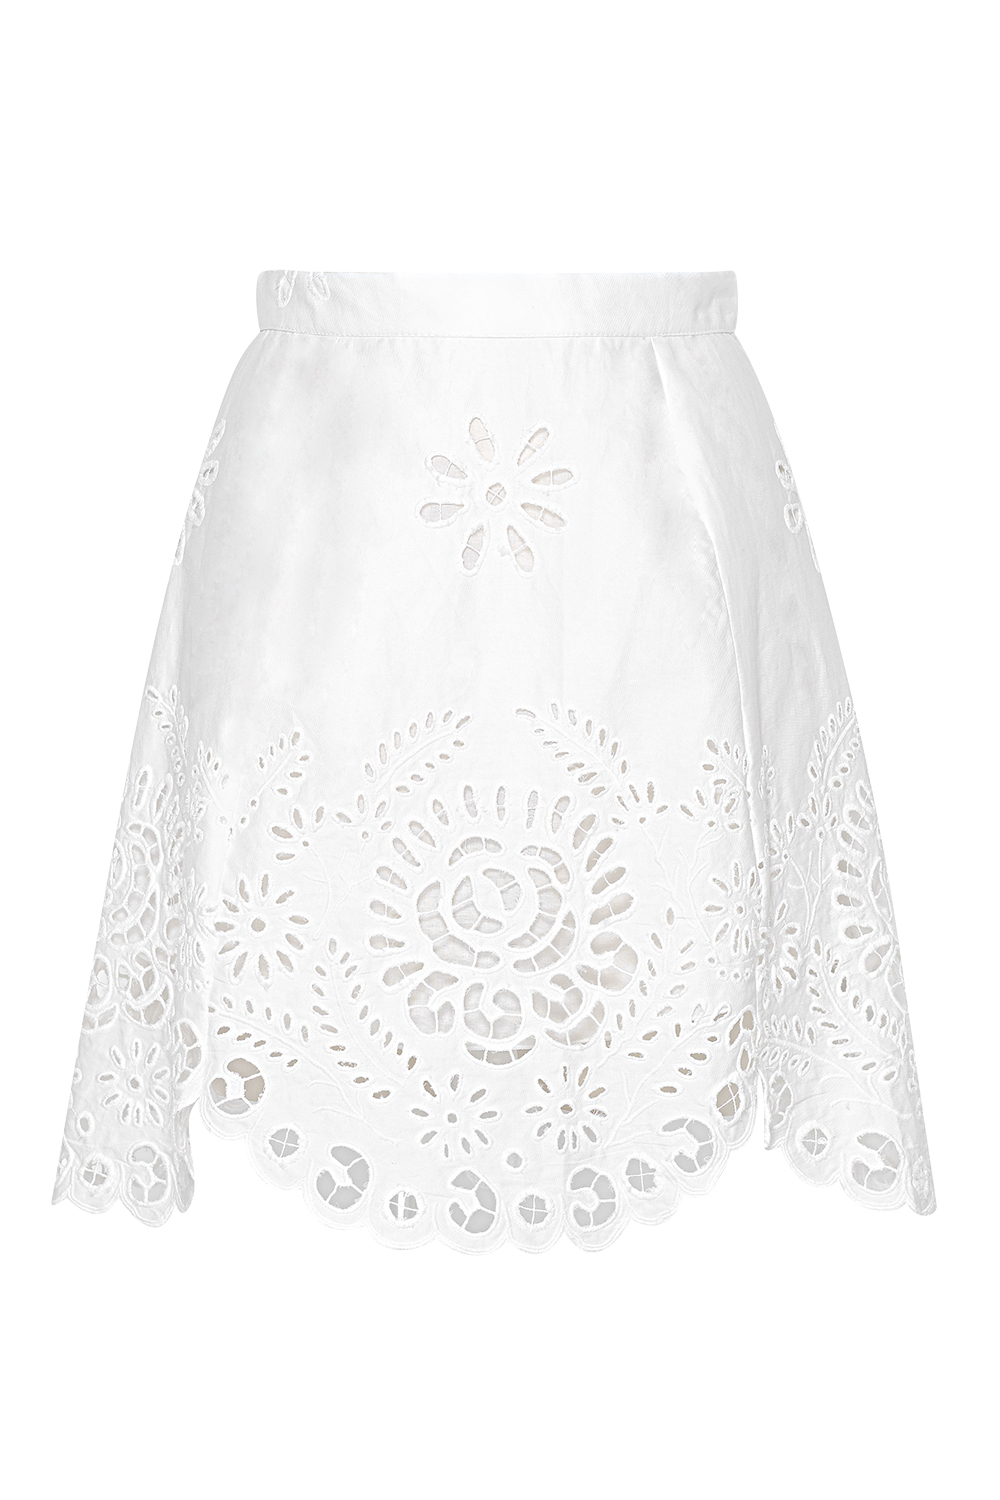 Skirt, $229, by Ruby.